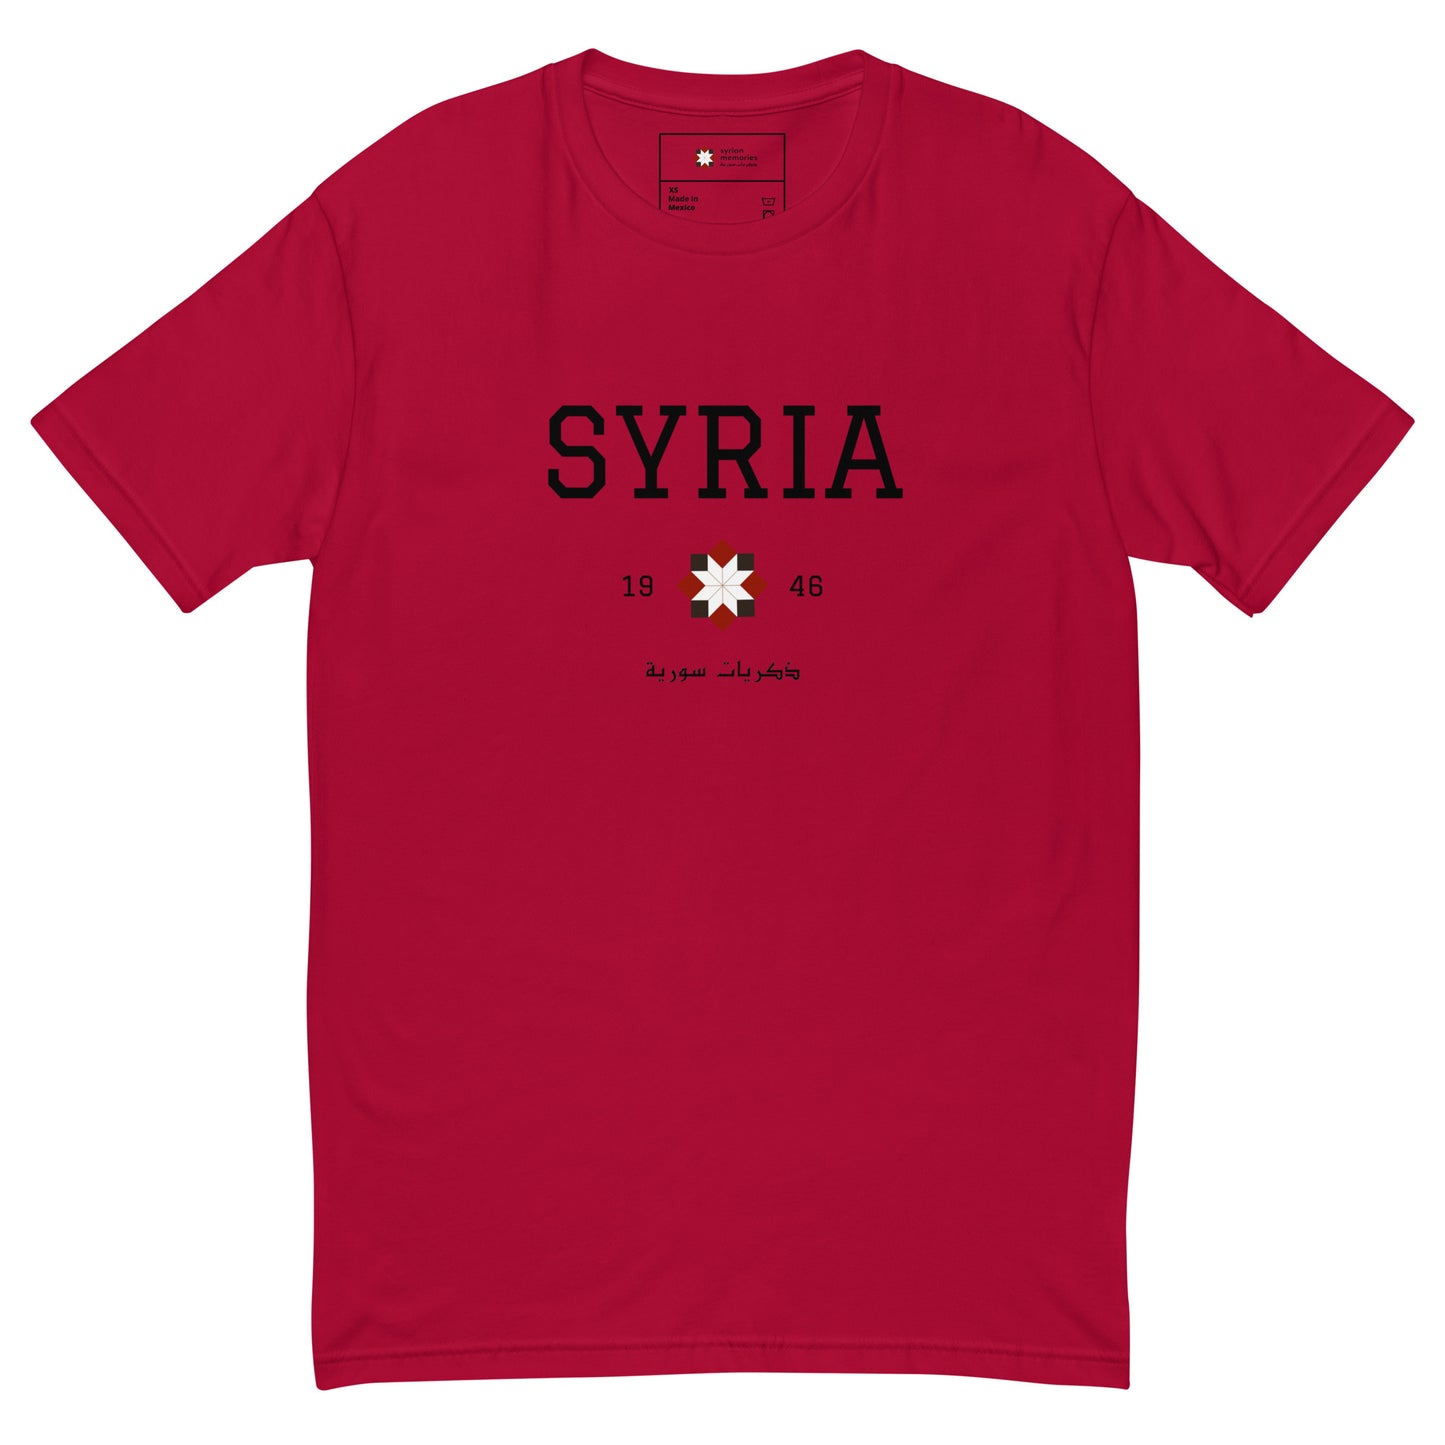 Syria - University Collection - Cotton T-shirt